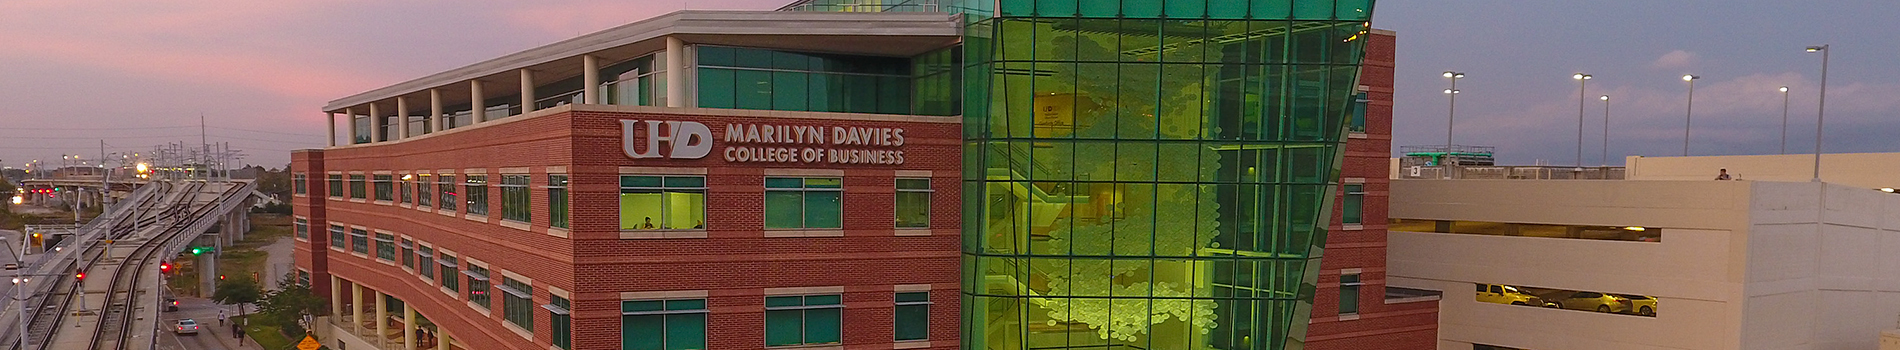 Marilyn Davies College of Business front view